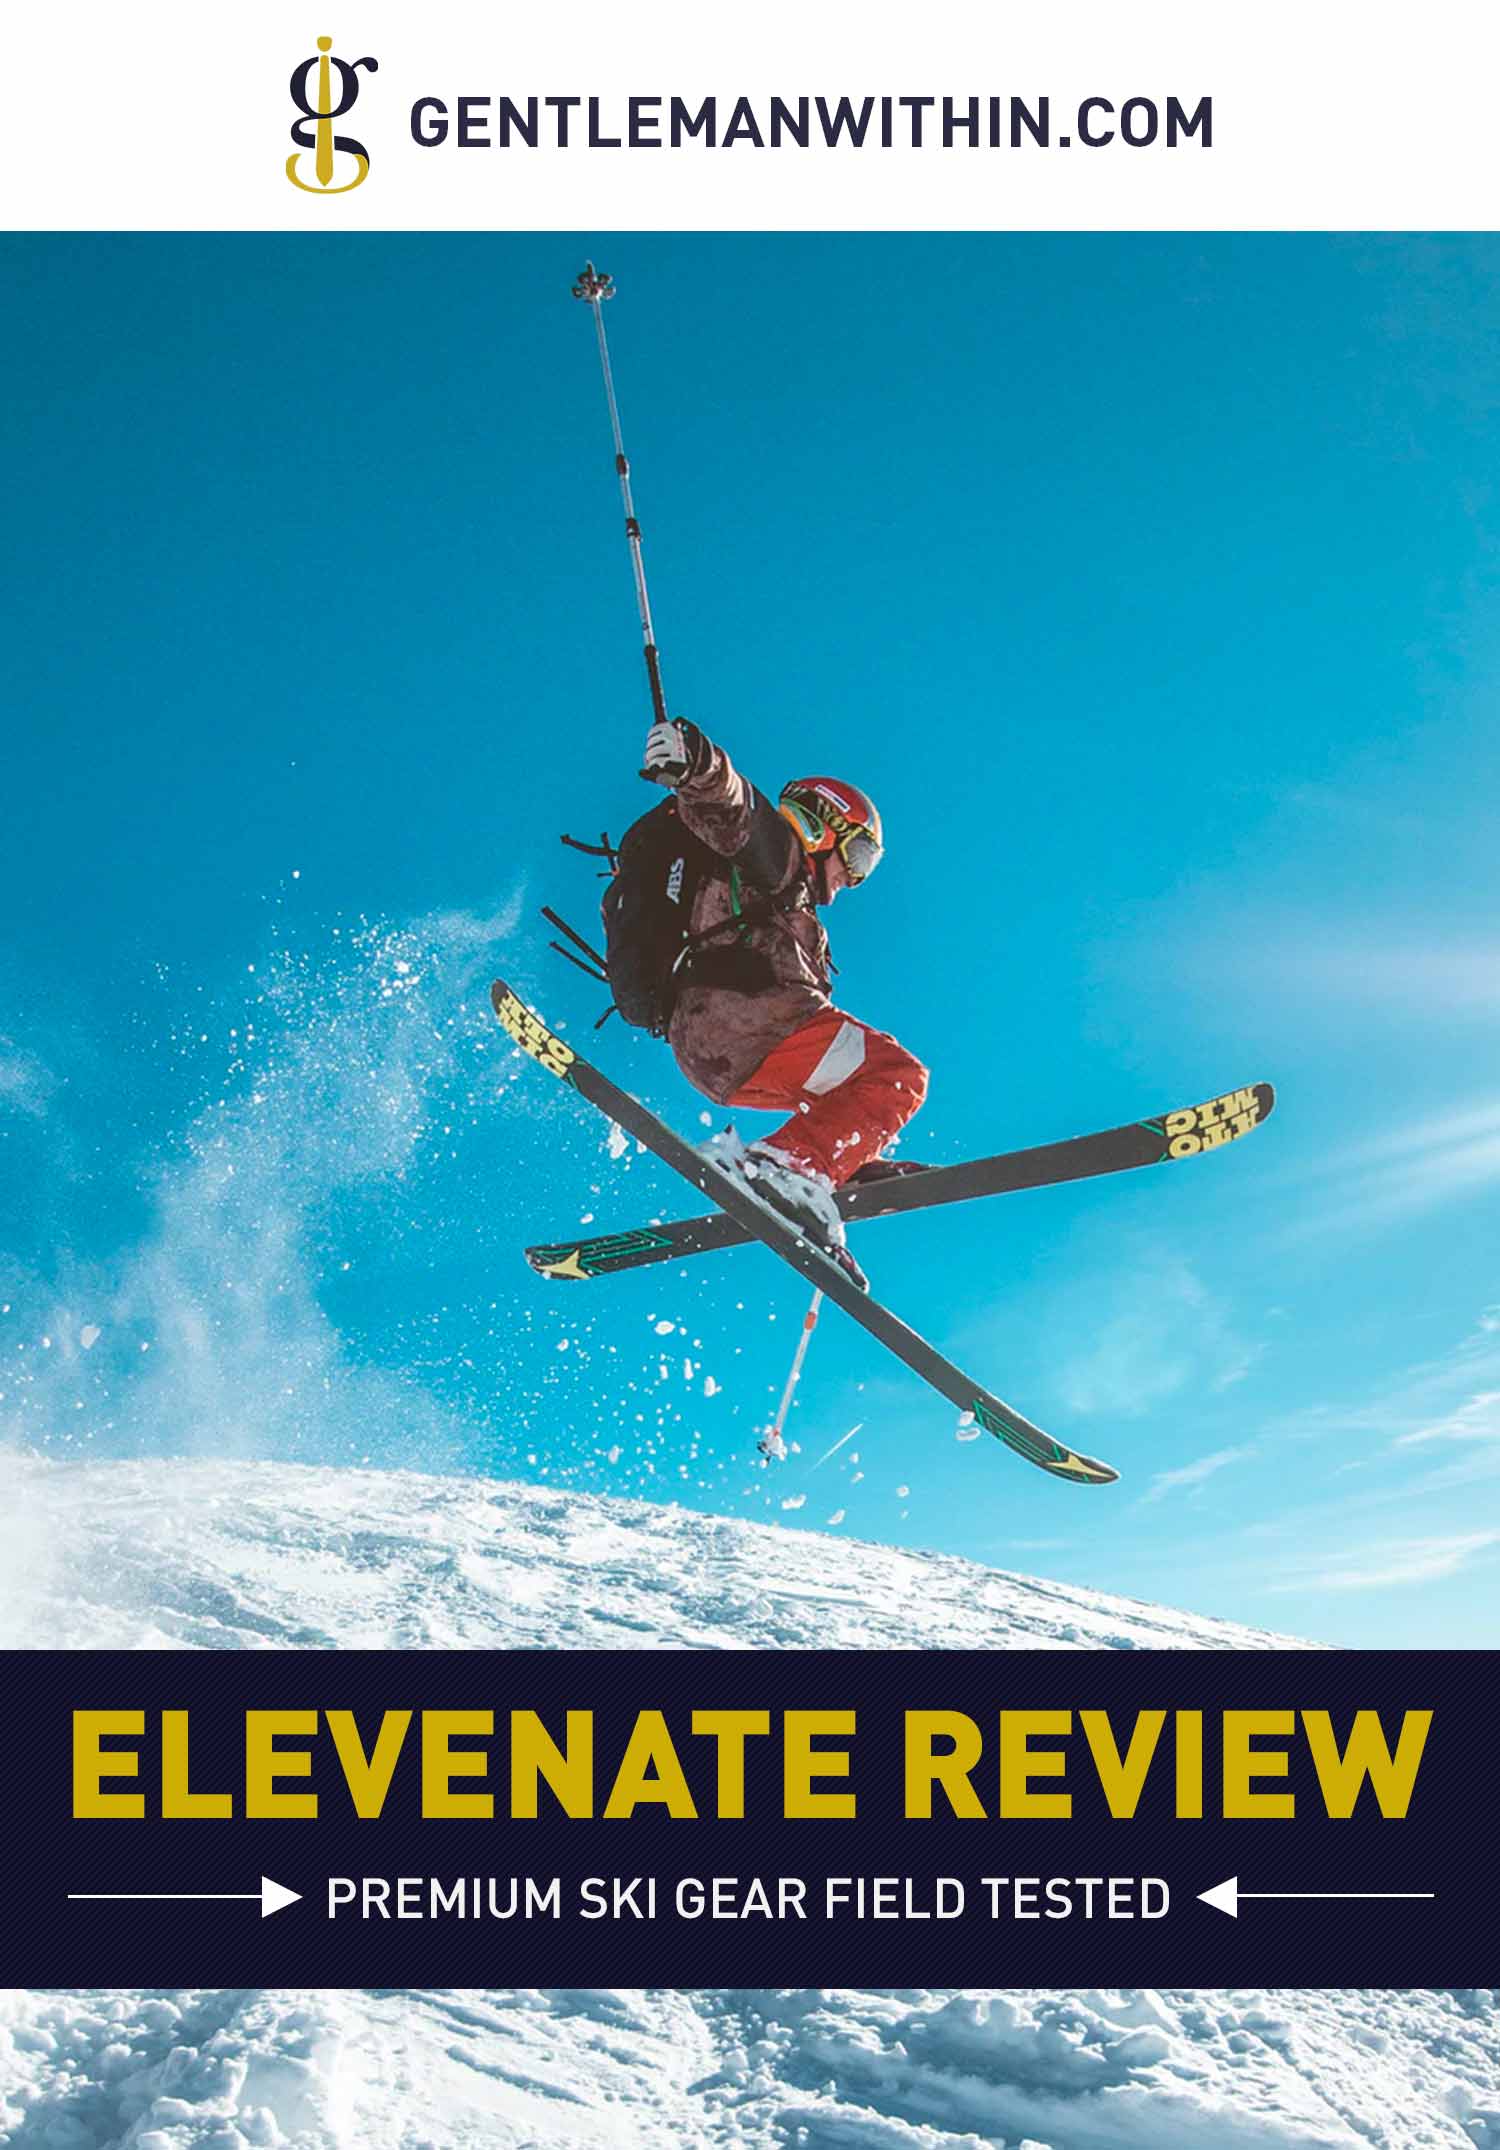 Elevenate Review: How Do They Perform | GENTLEMAN WITHIN